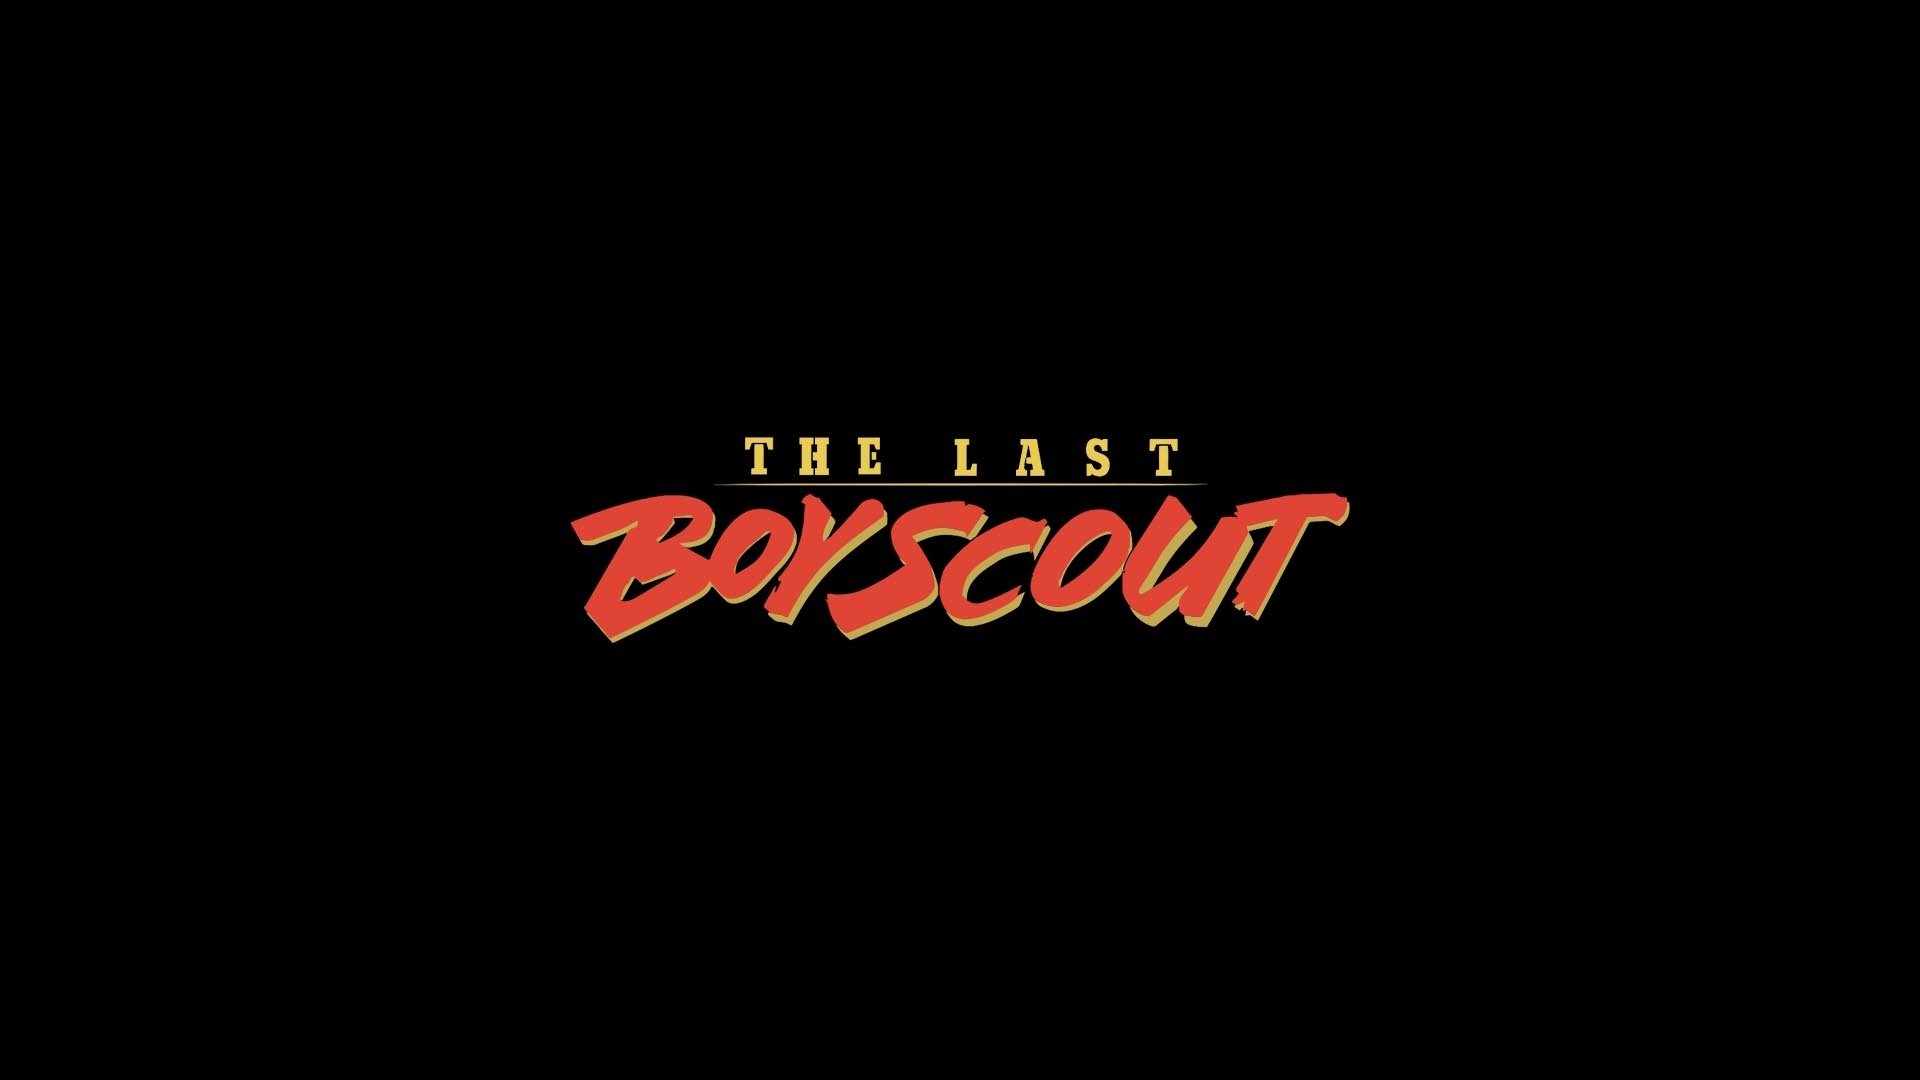 The Last Boy Scout HD Wallpaper Background Image